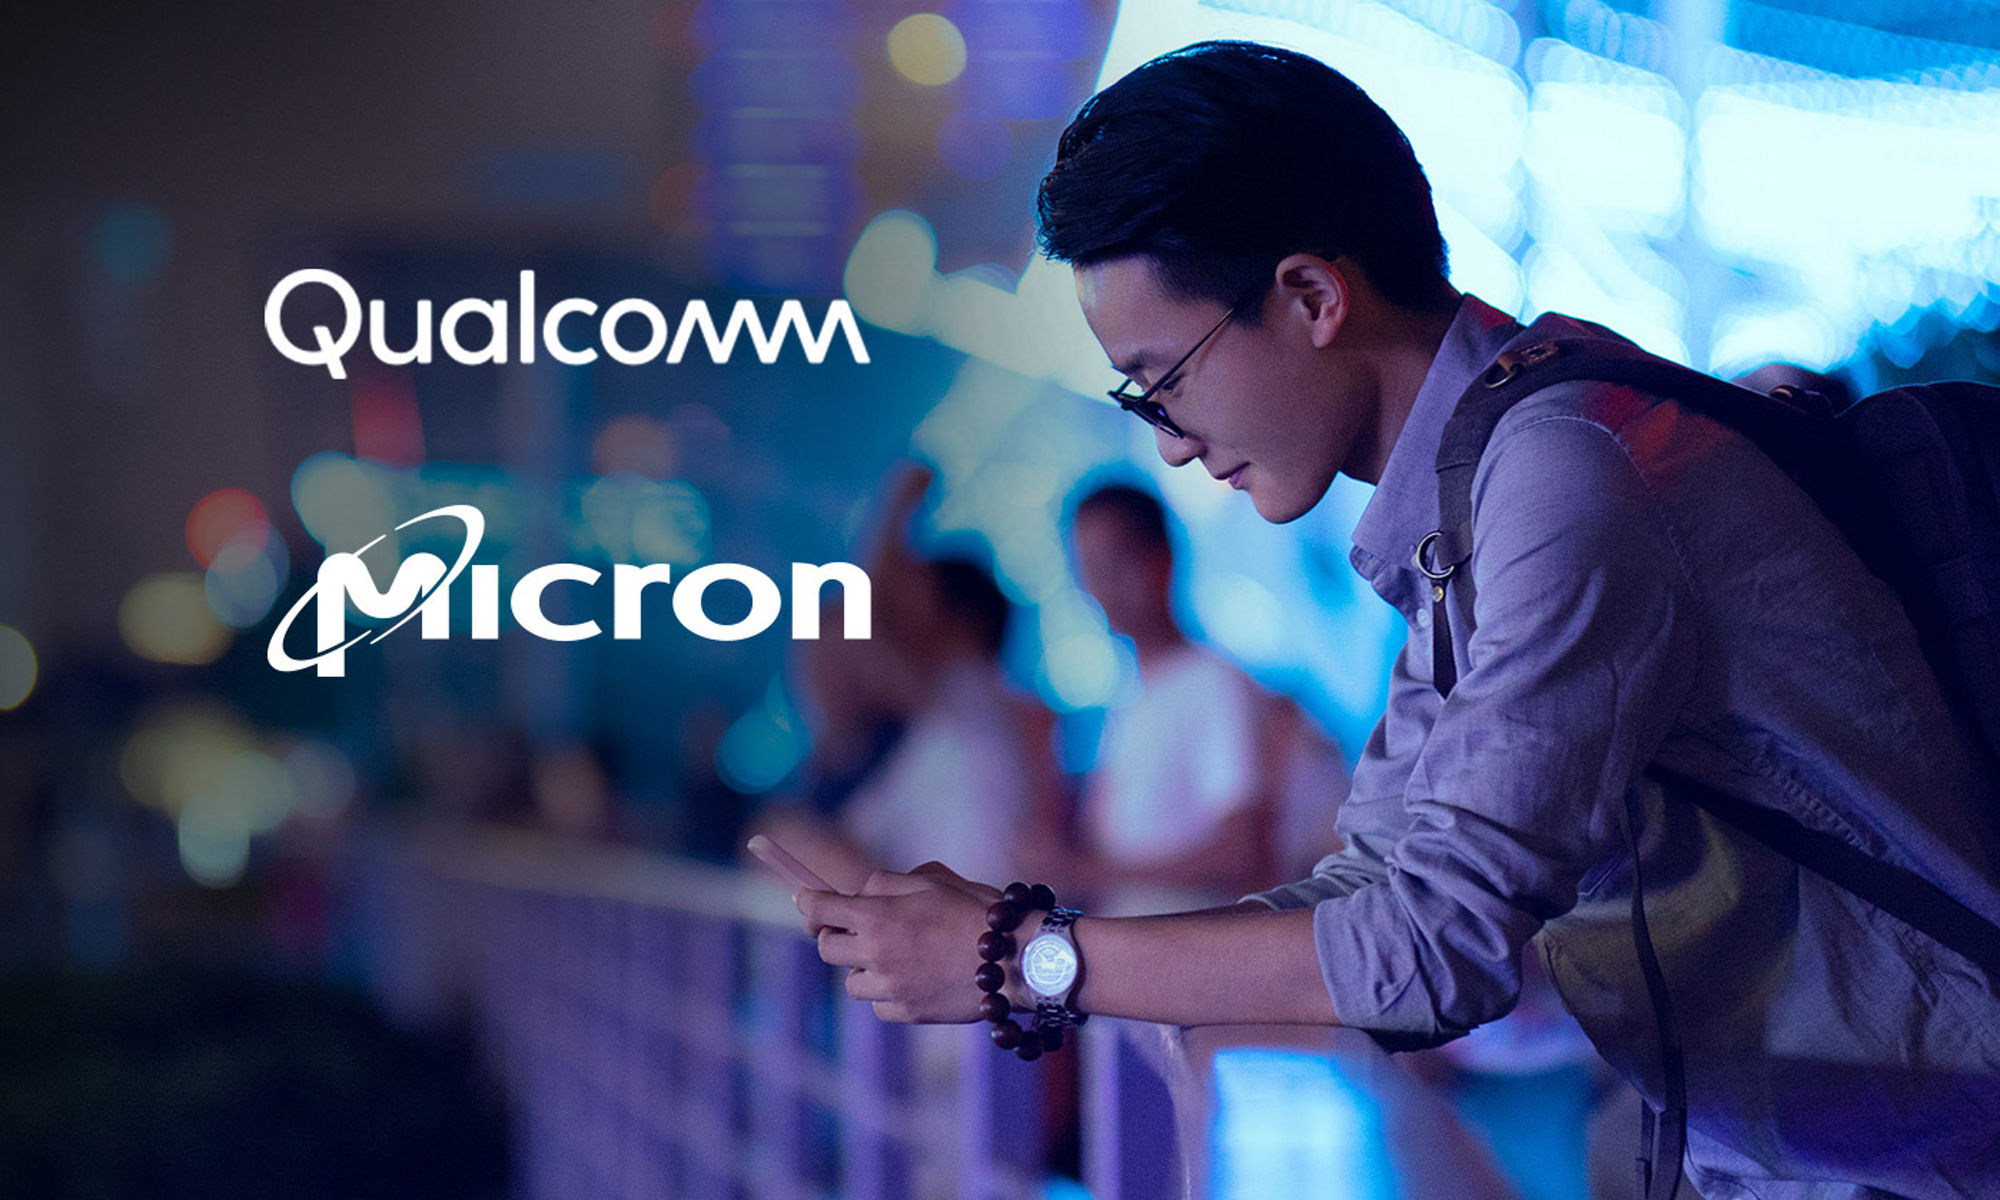 Qualcomm and Micron logos against a blurred background and a young male in the foreground, leaning over a railing, looking at his cell phone